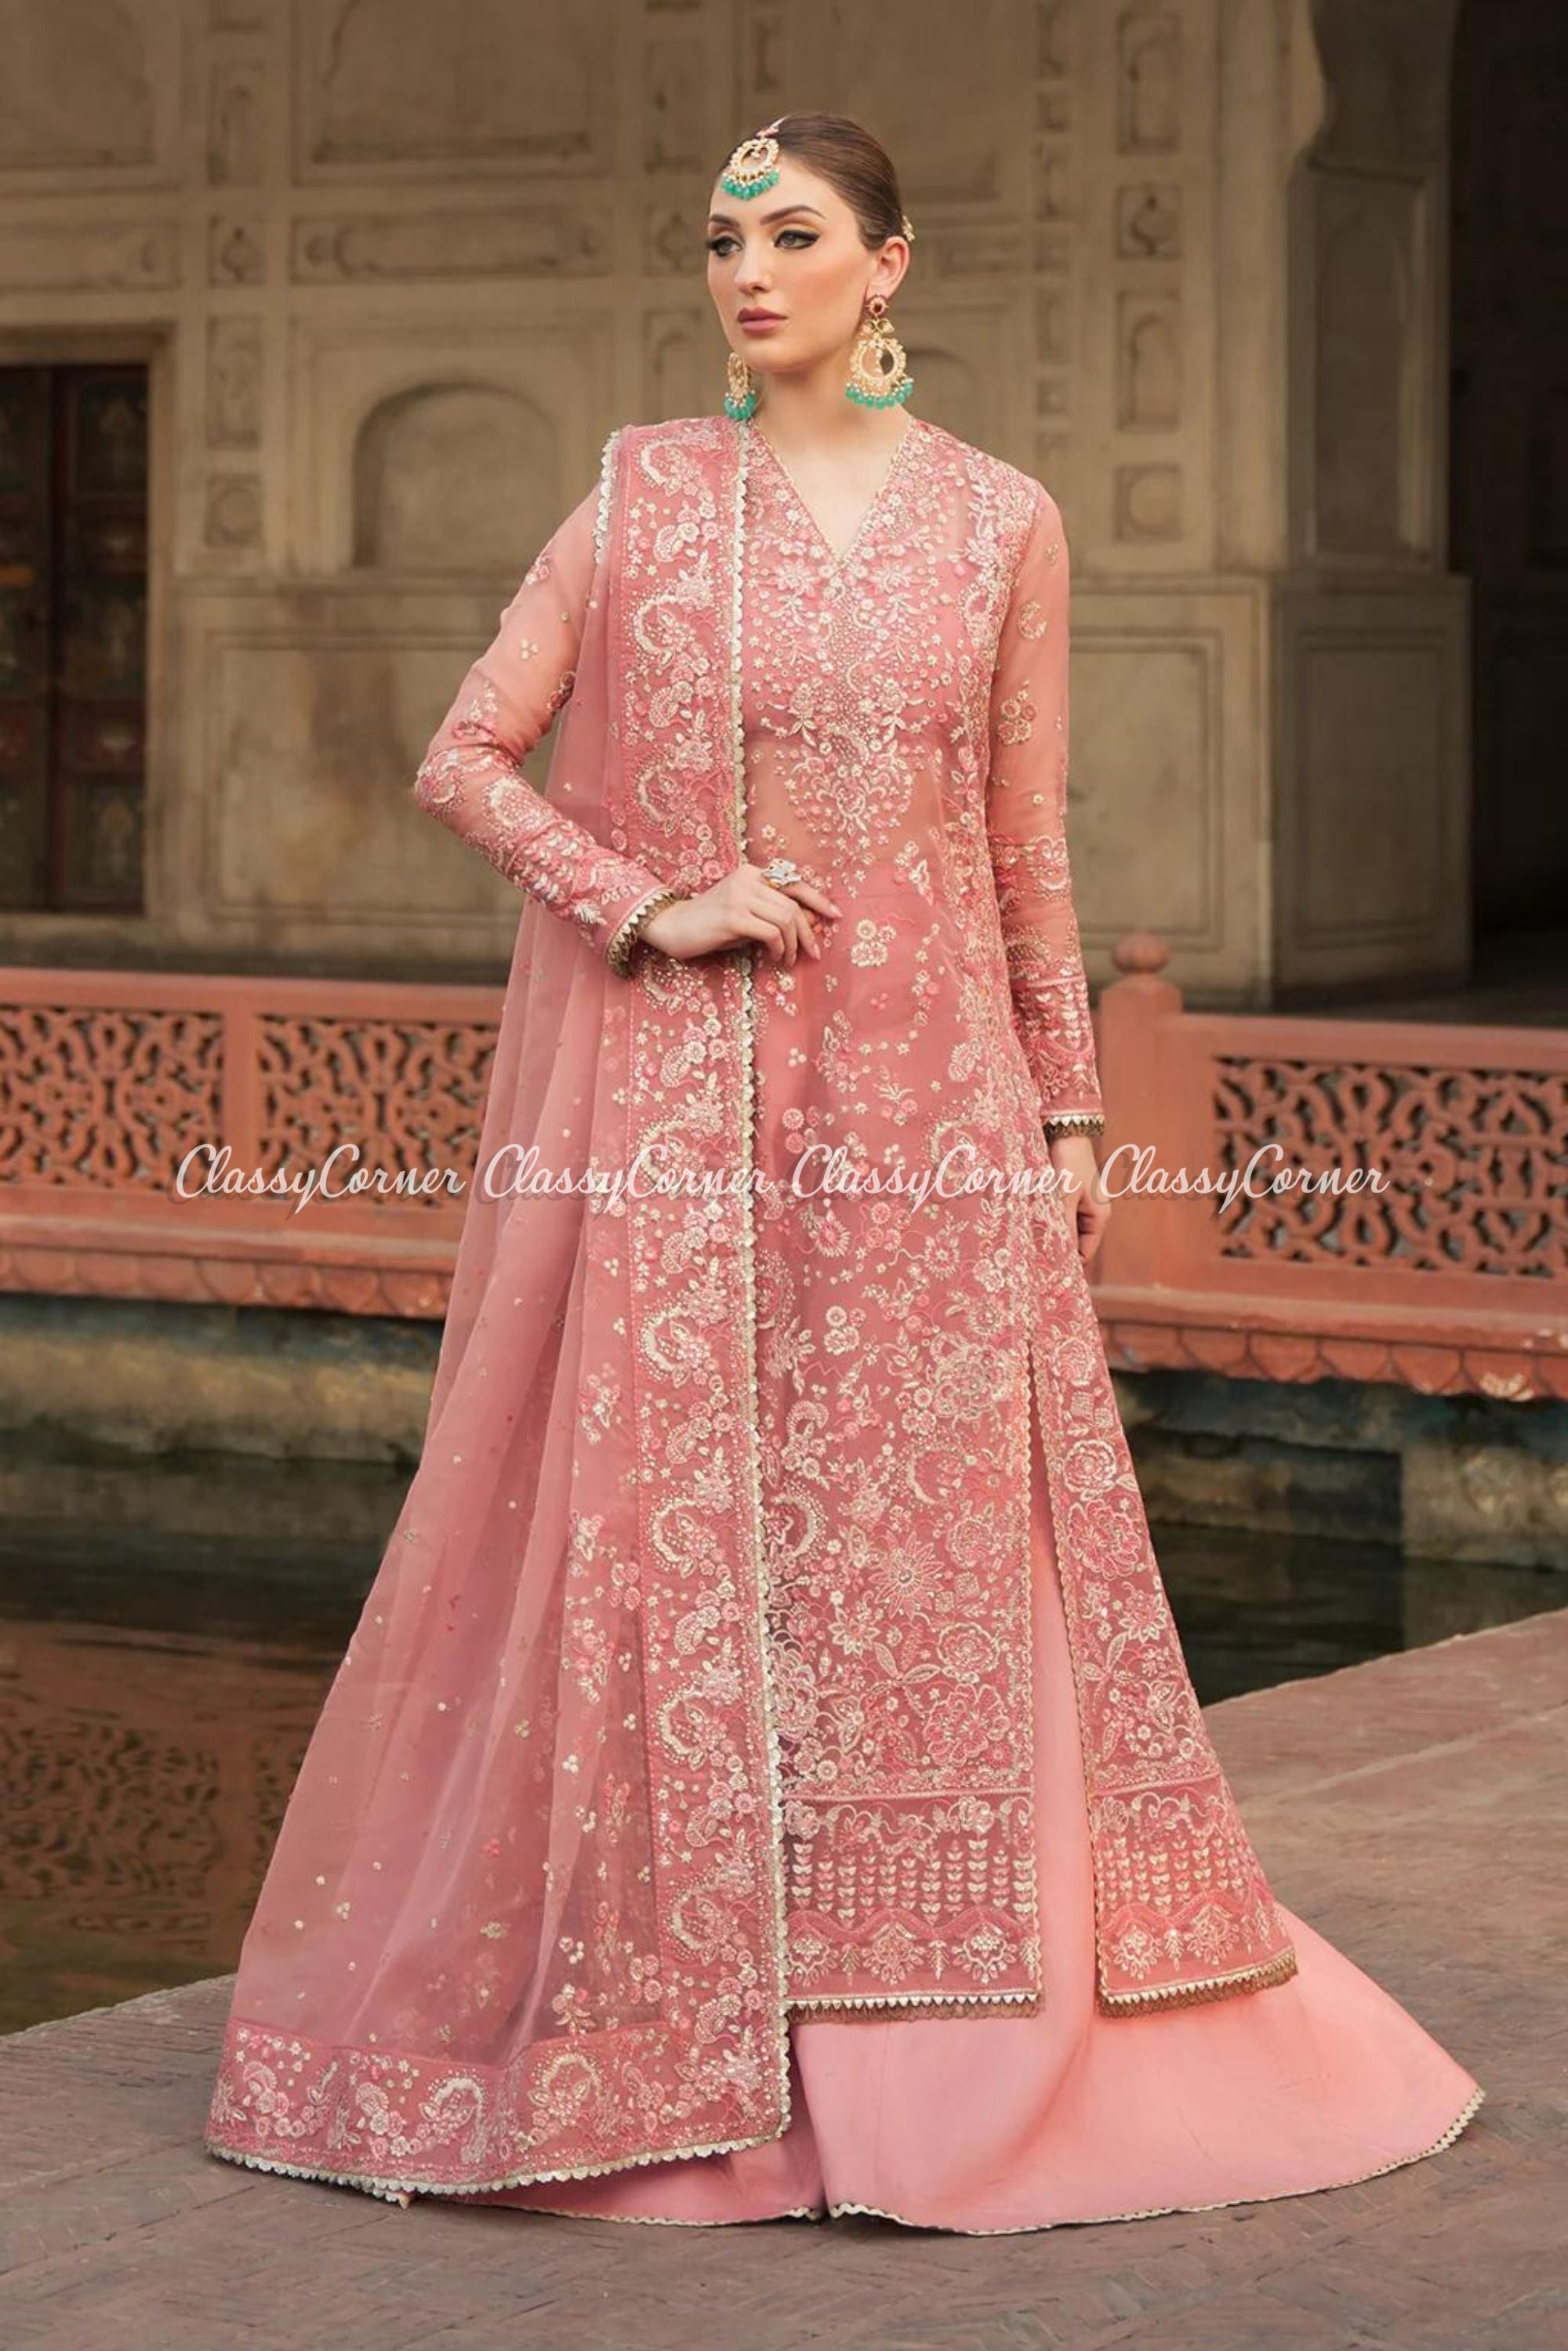 Pakistani Wedding Outfits For Guests 